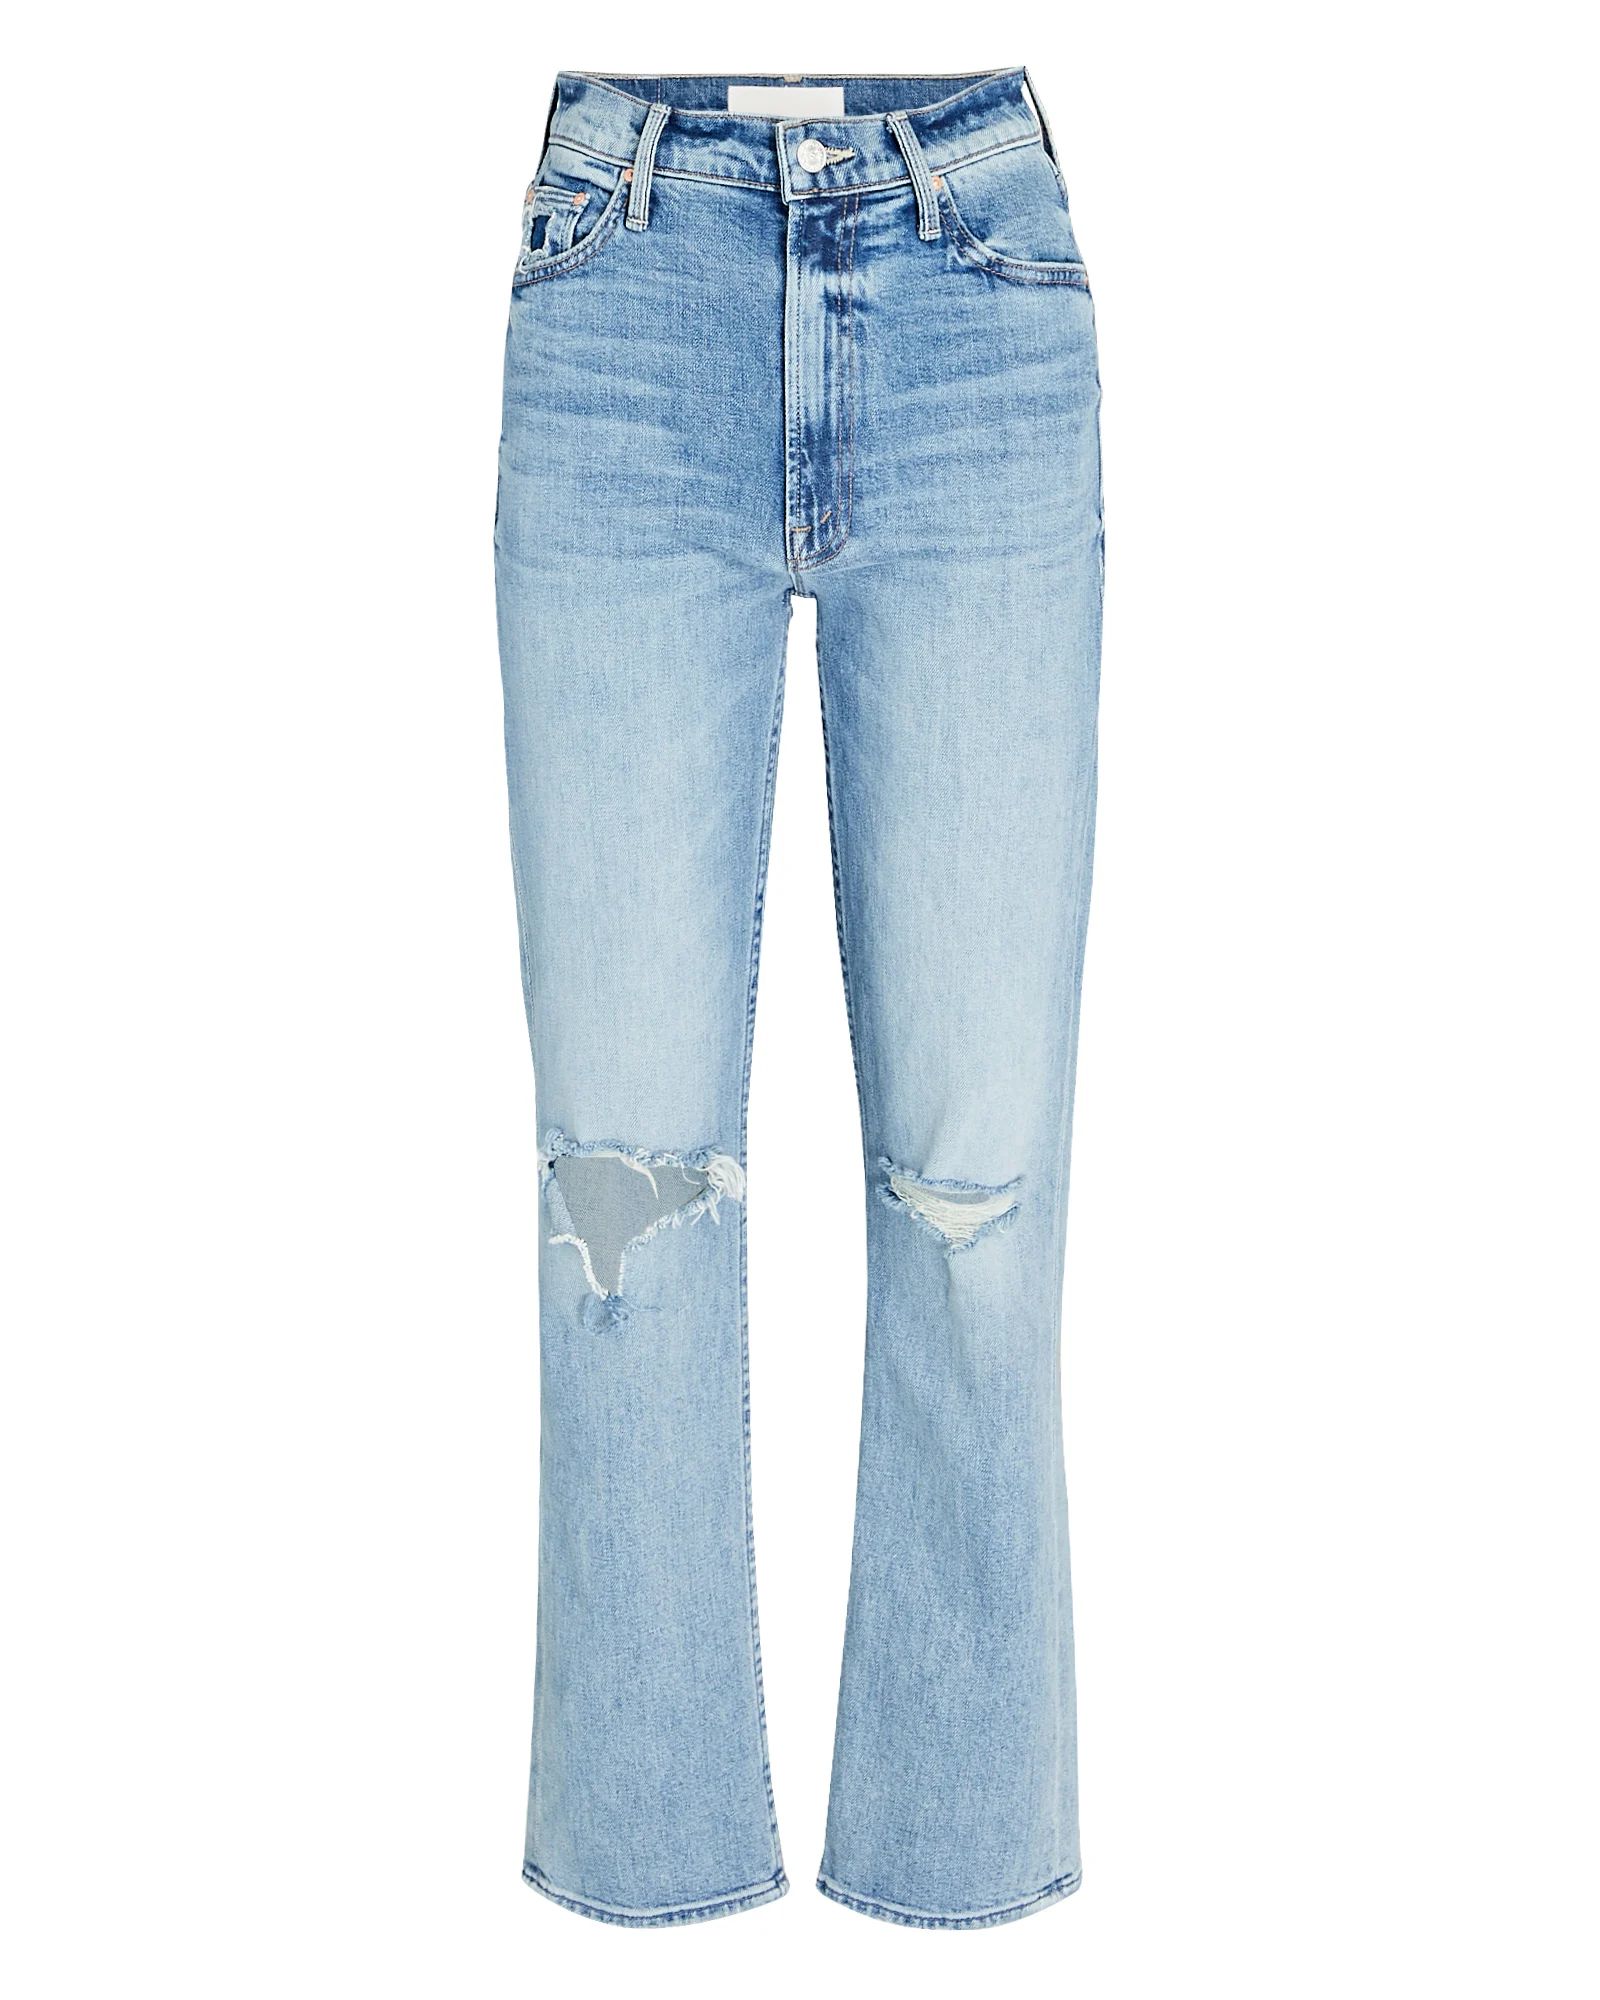 MOTHER The High-Waisted Rider Jeans, Wild And Wicked 29 | INTERMIX